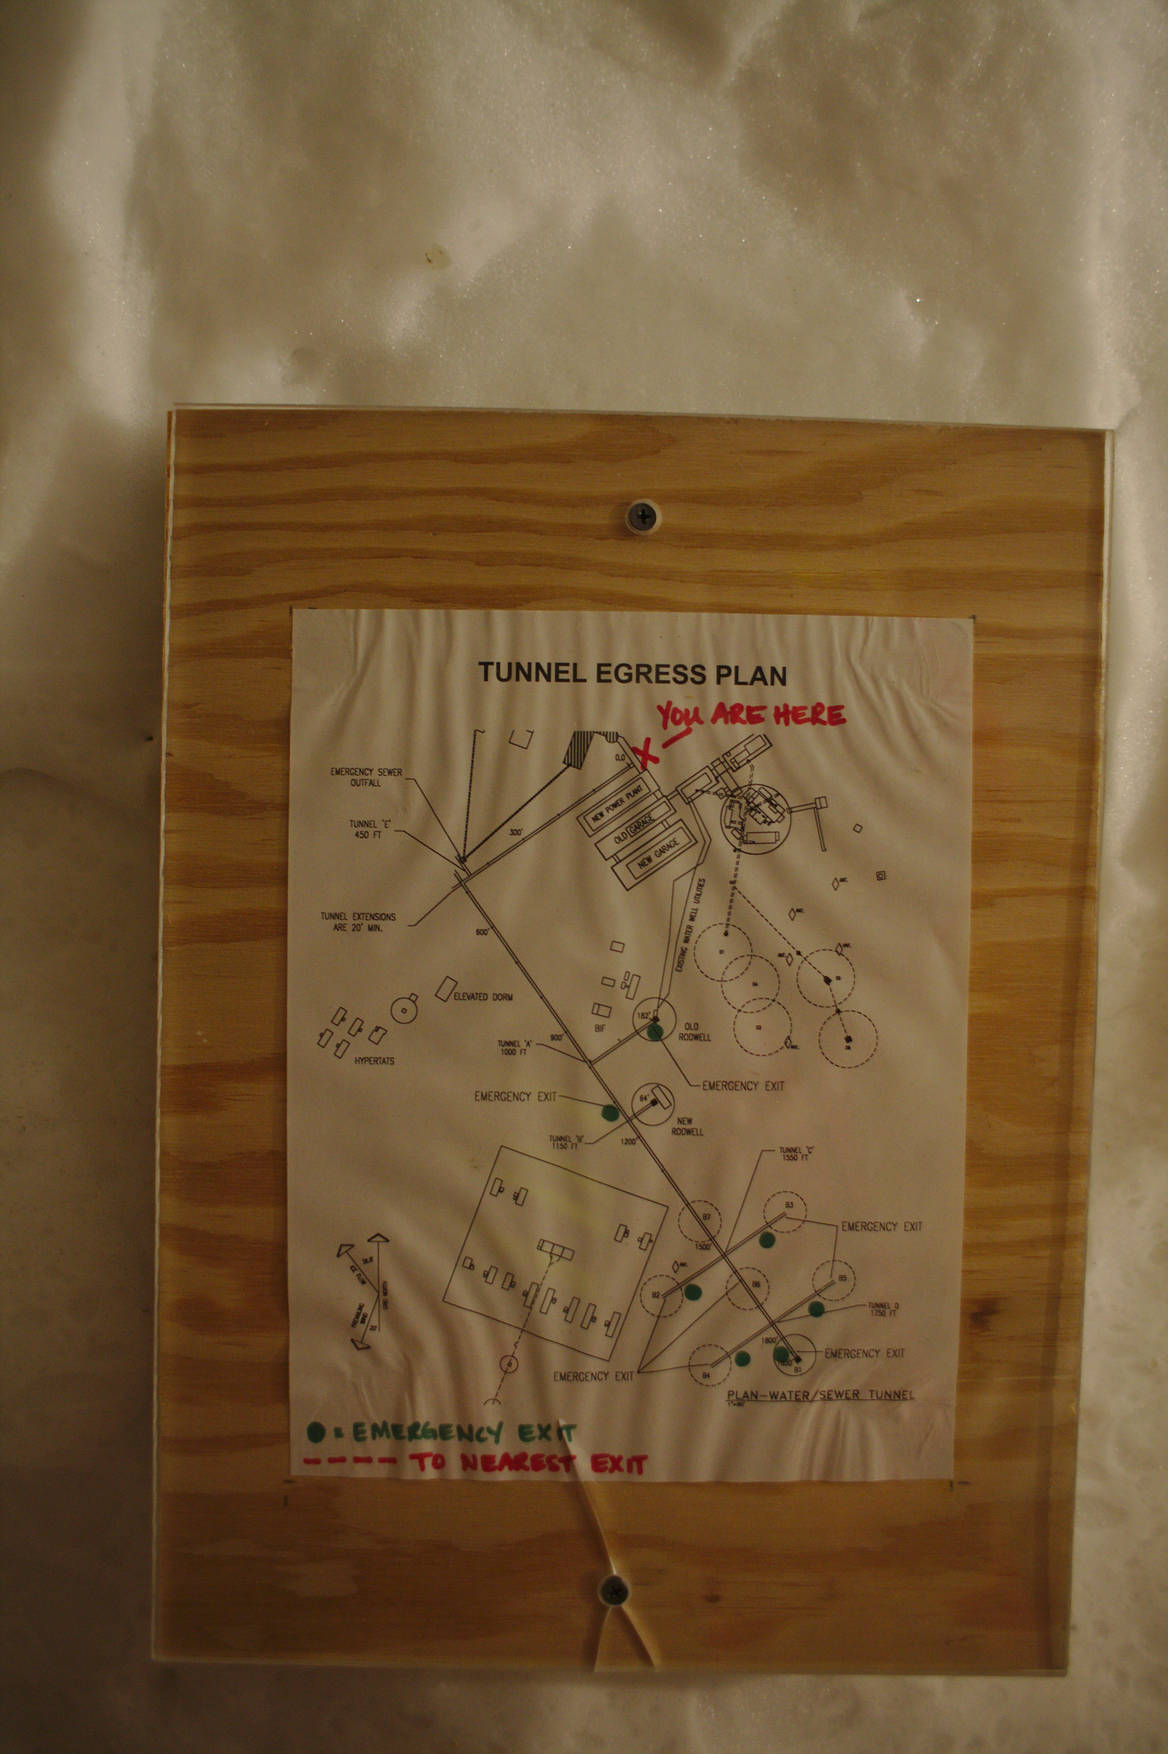 A map of the tunnel network. Markers show the different escape hatches, Rod Wells, and sewer bulbs.